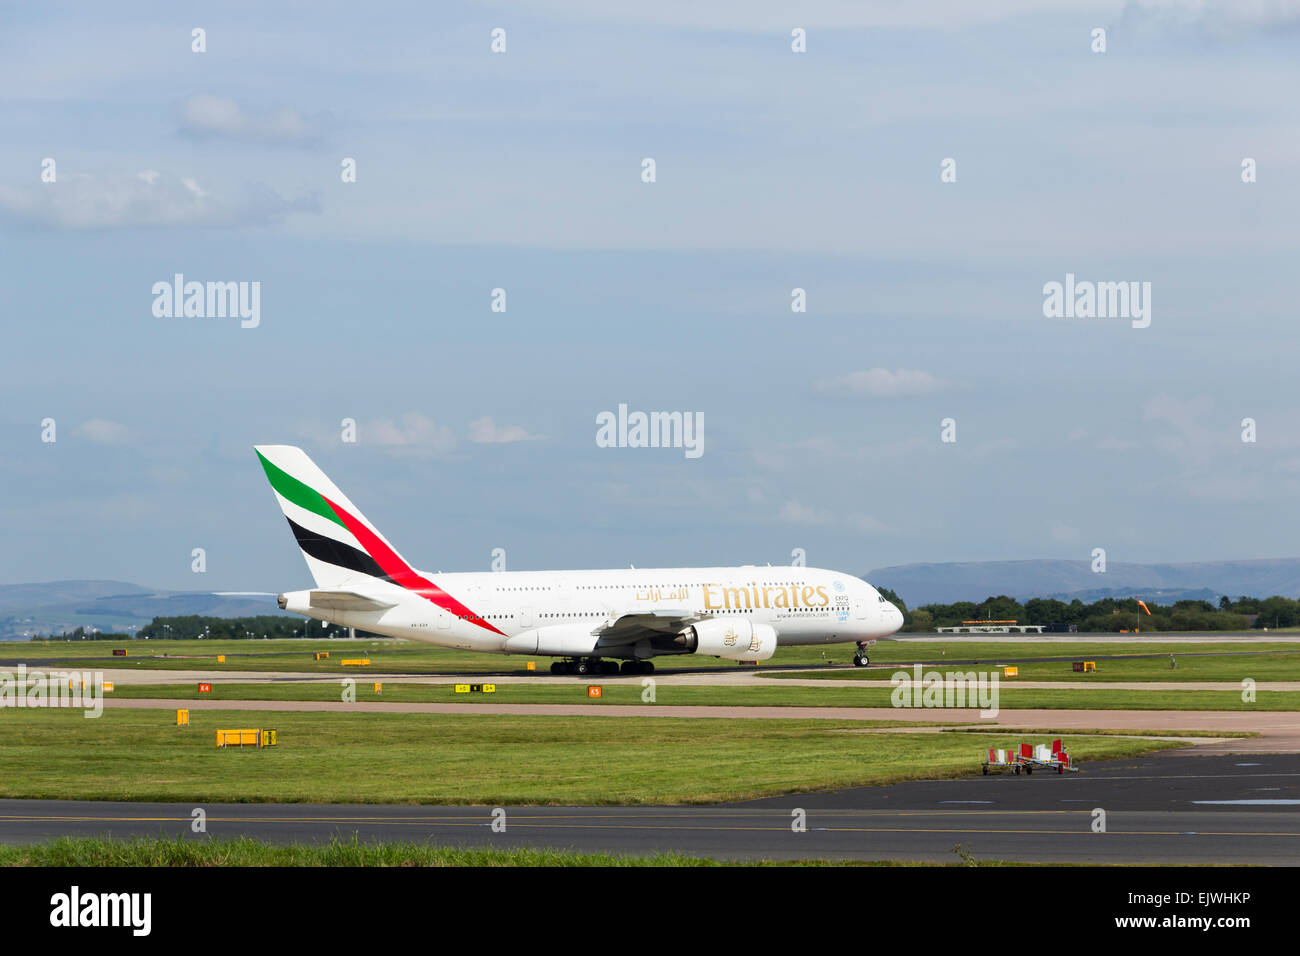 Emirates Airbus A380  aircraft taxiing towards the take-off runway at Manchester airport for  the flight to Dubai. Stock Photo